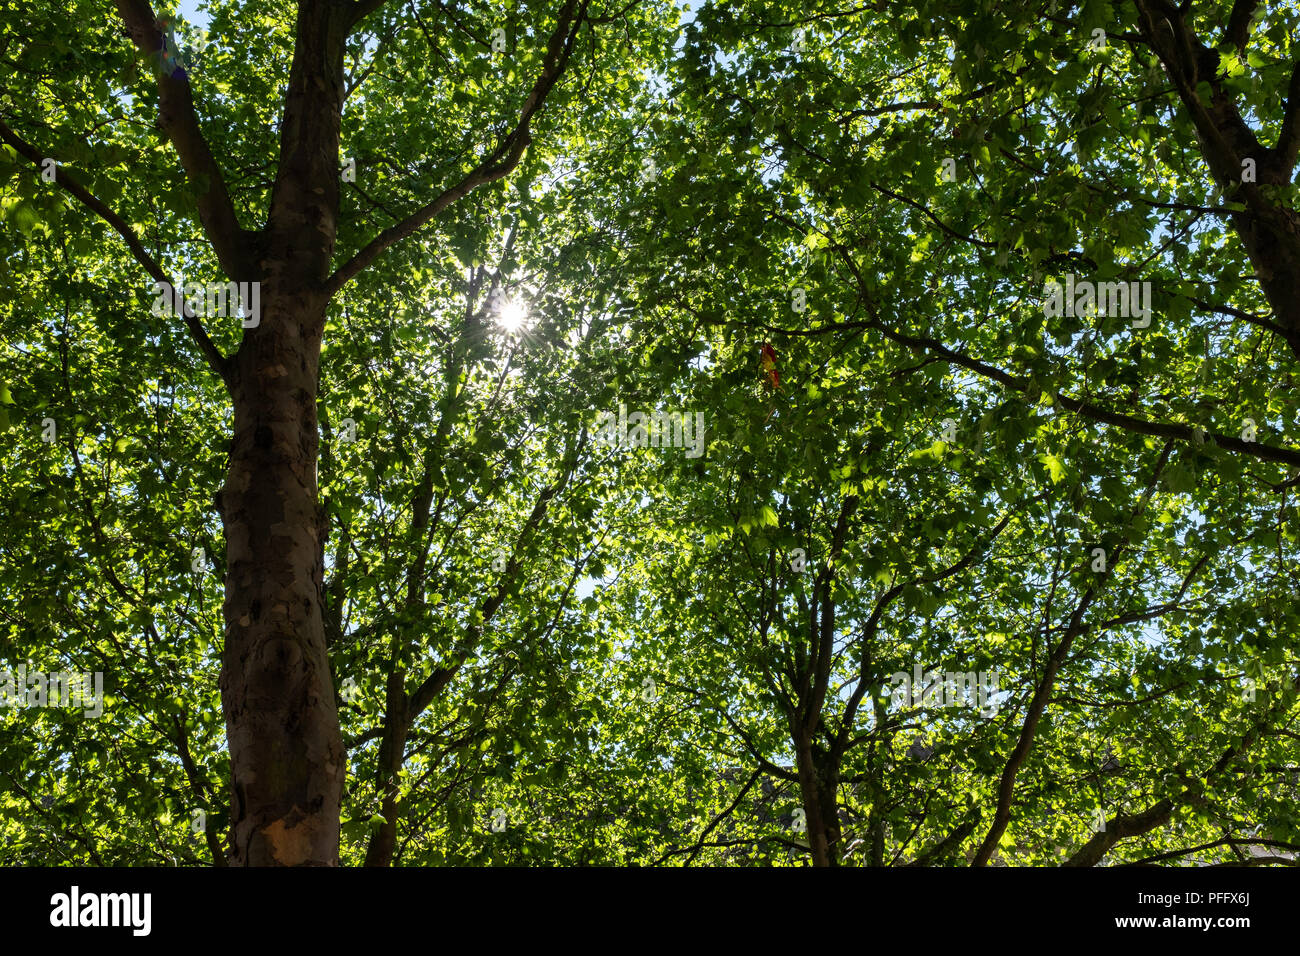 Image of Kingston Upon Hull UK City of Culture 2017. Sun shines through the tree branches and green leaves. Stock Photo